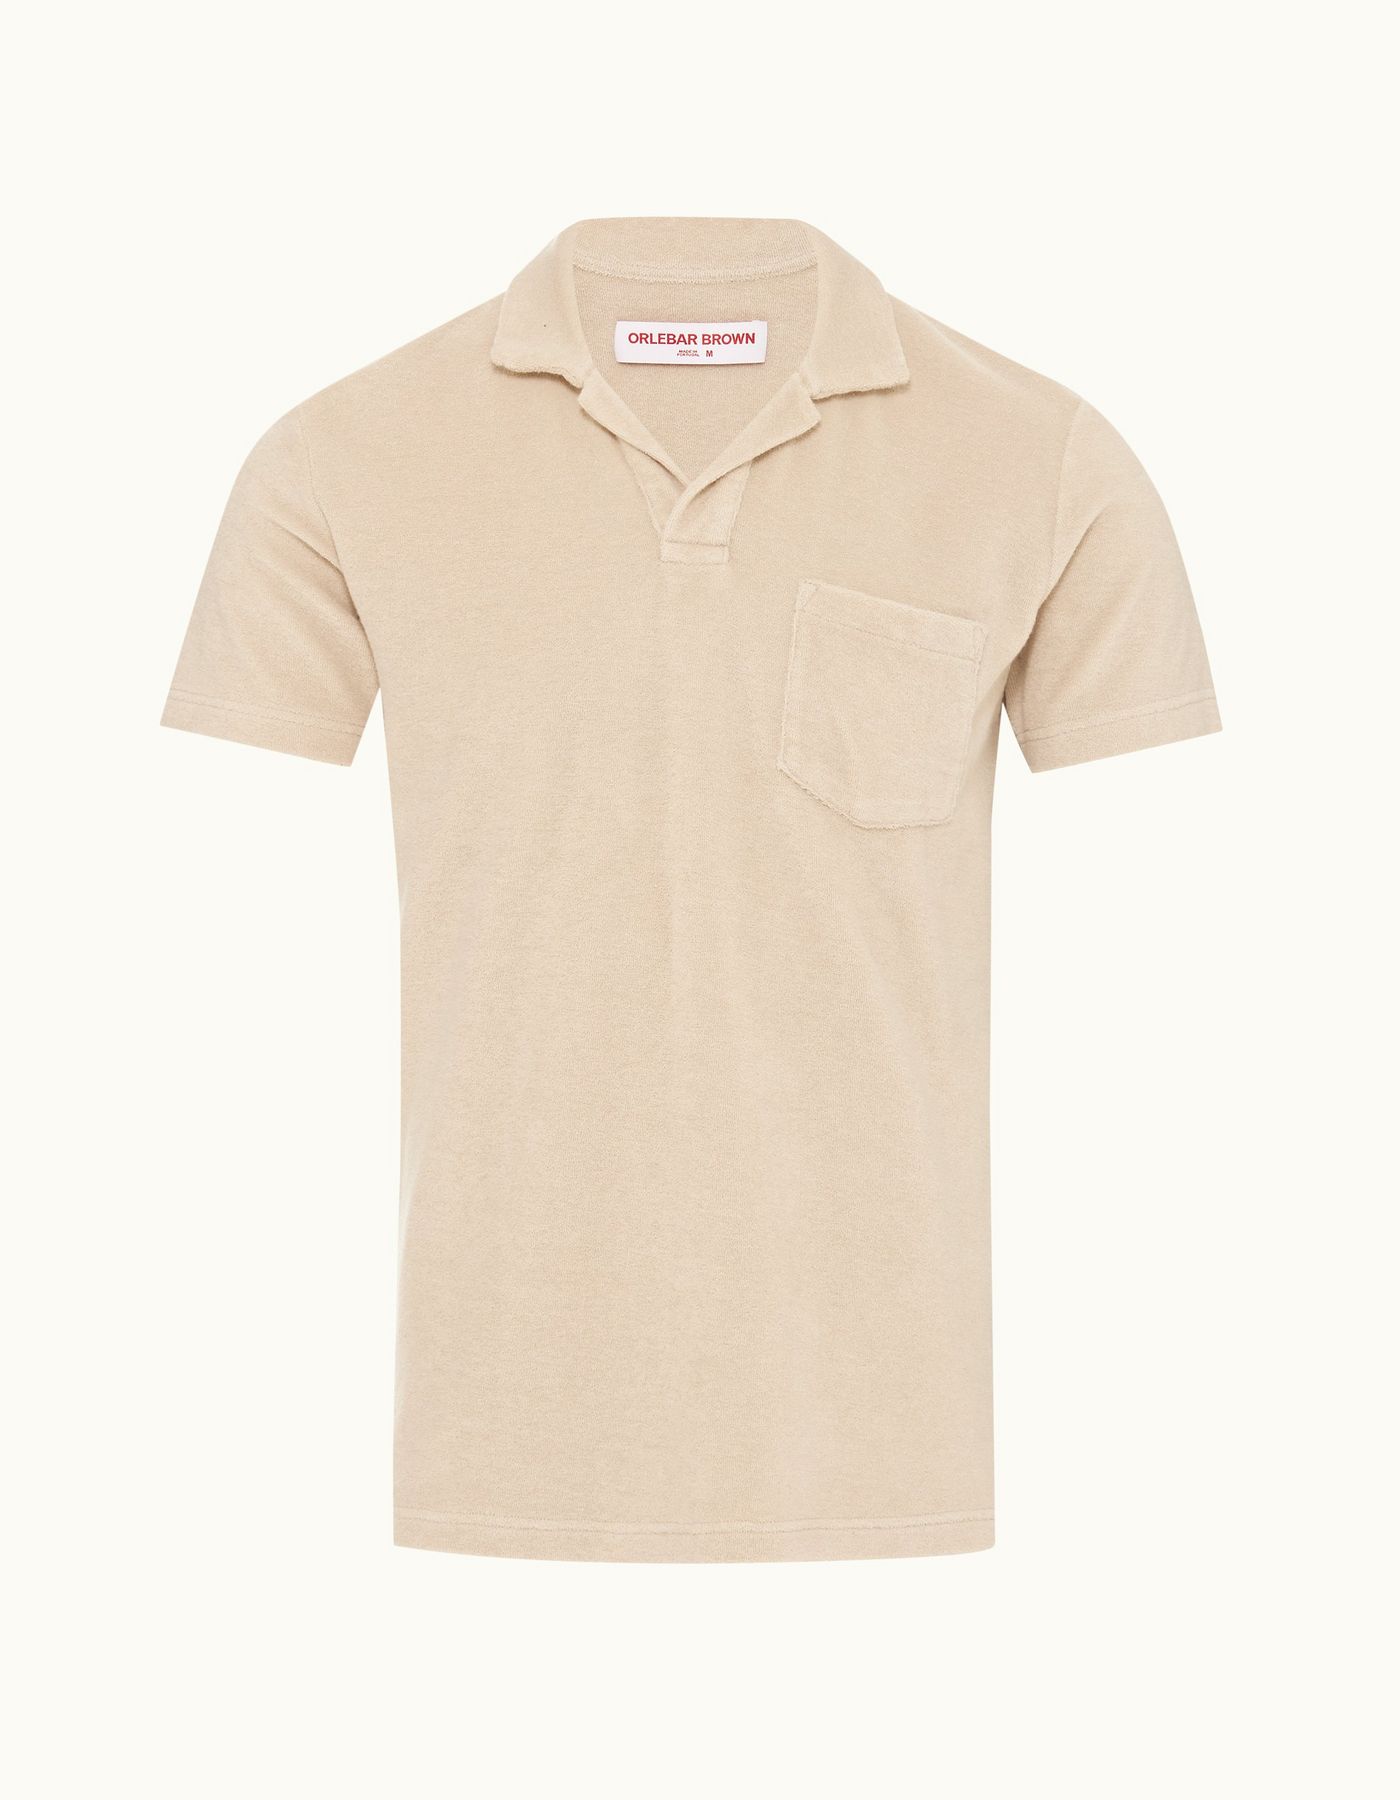 Terry Towelling - Mens 007 Taupe Tailored Fit Organic Cotton Towelling Resort Polo Shirt